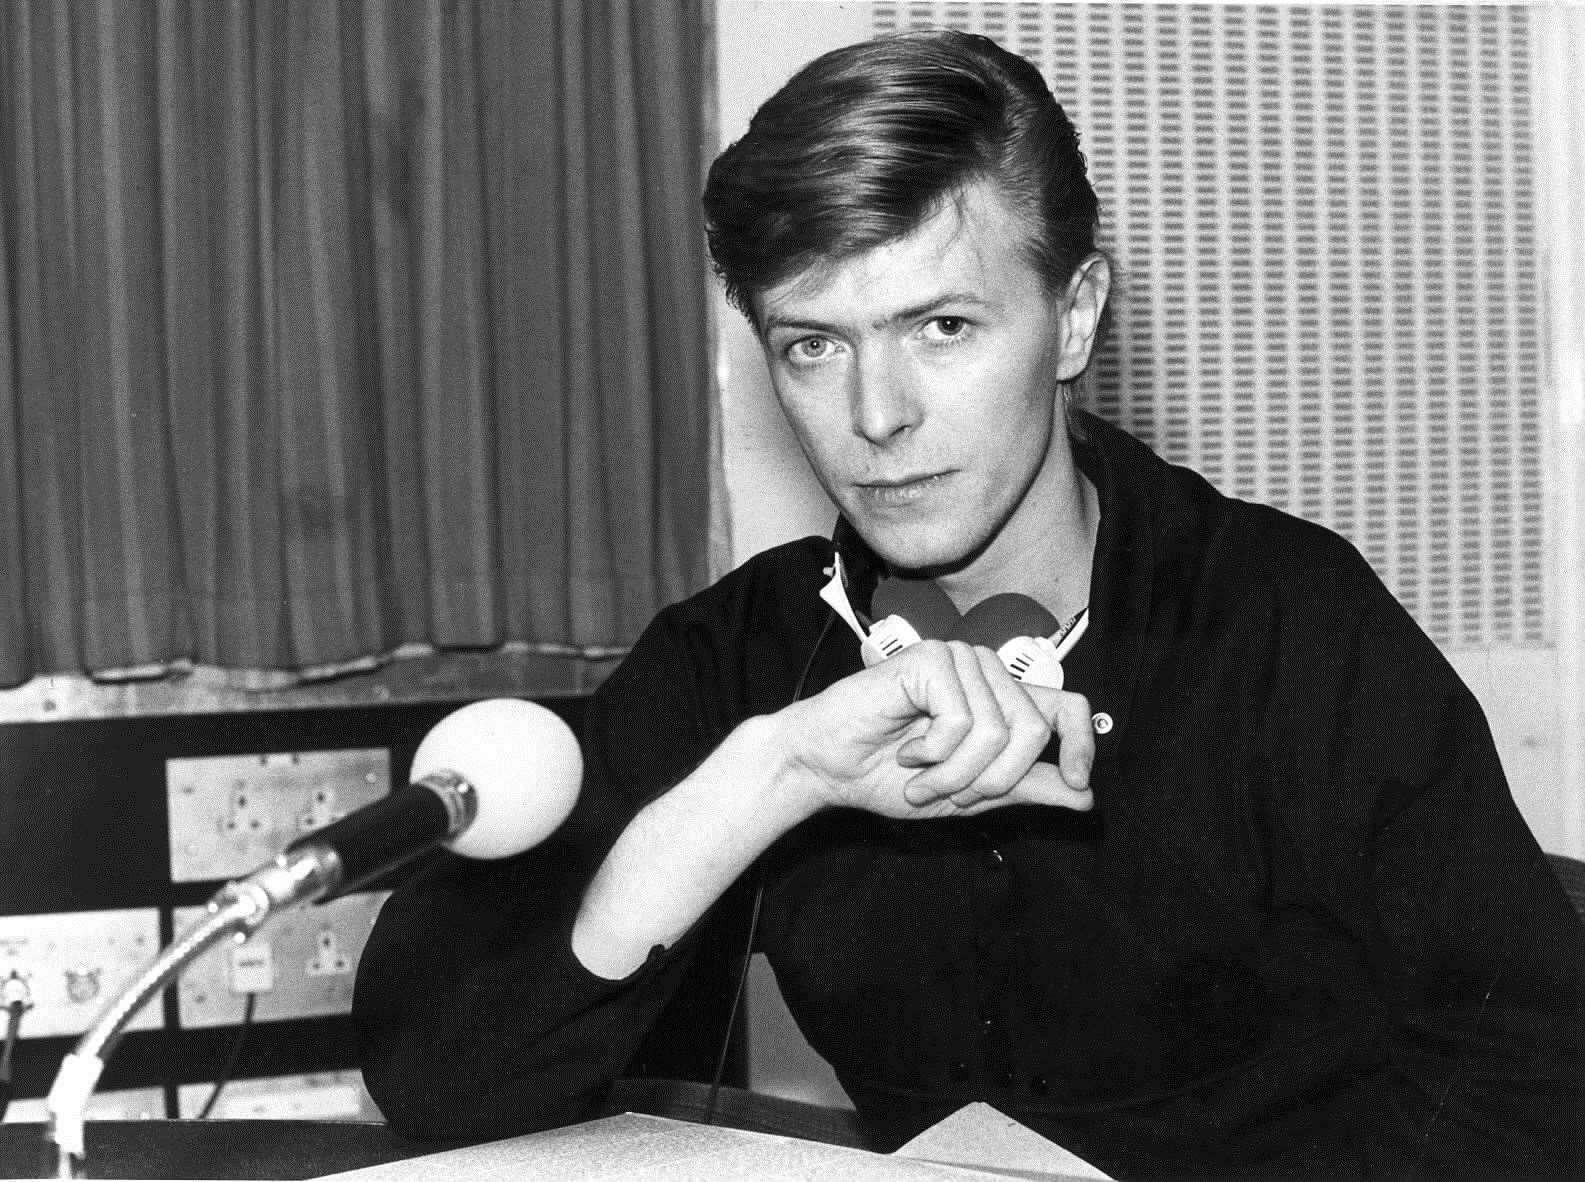 David Bowie turns radio DJ for a Star Special broadcast in May 1979. Image BBC